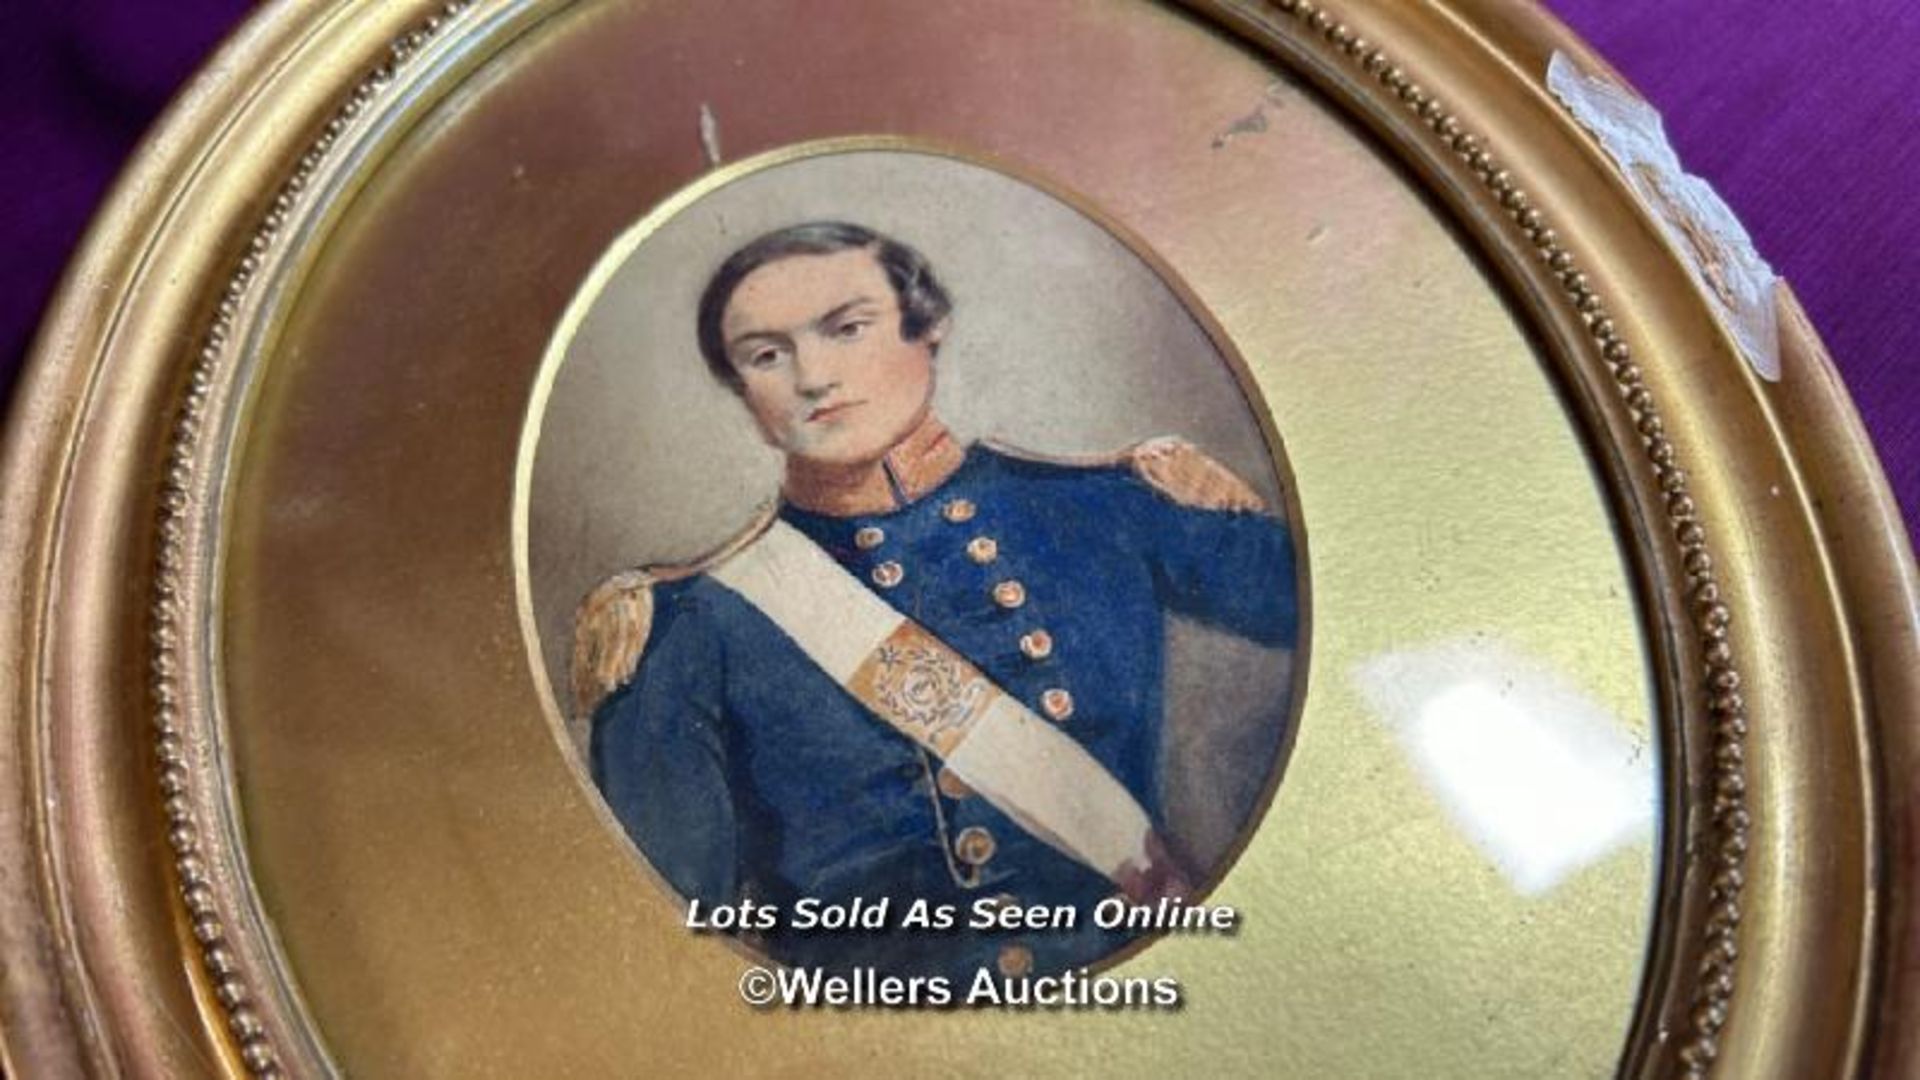 SMALL GILT FRAMED OVAL PORTRAIT WATERCOLOUR DEPICTING A MILITARY OFFICER, UNSIGNED, 10 X 13CM - Image 2 of 4